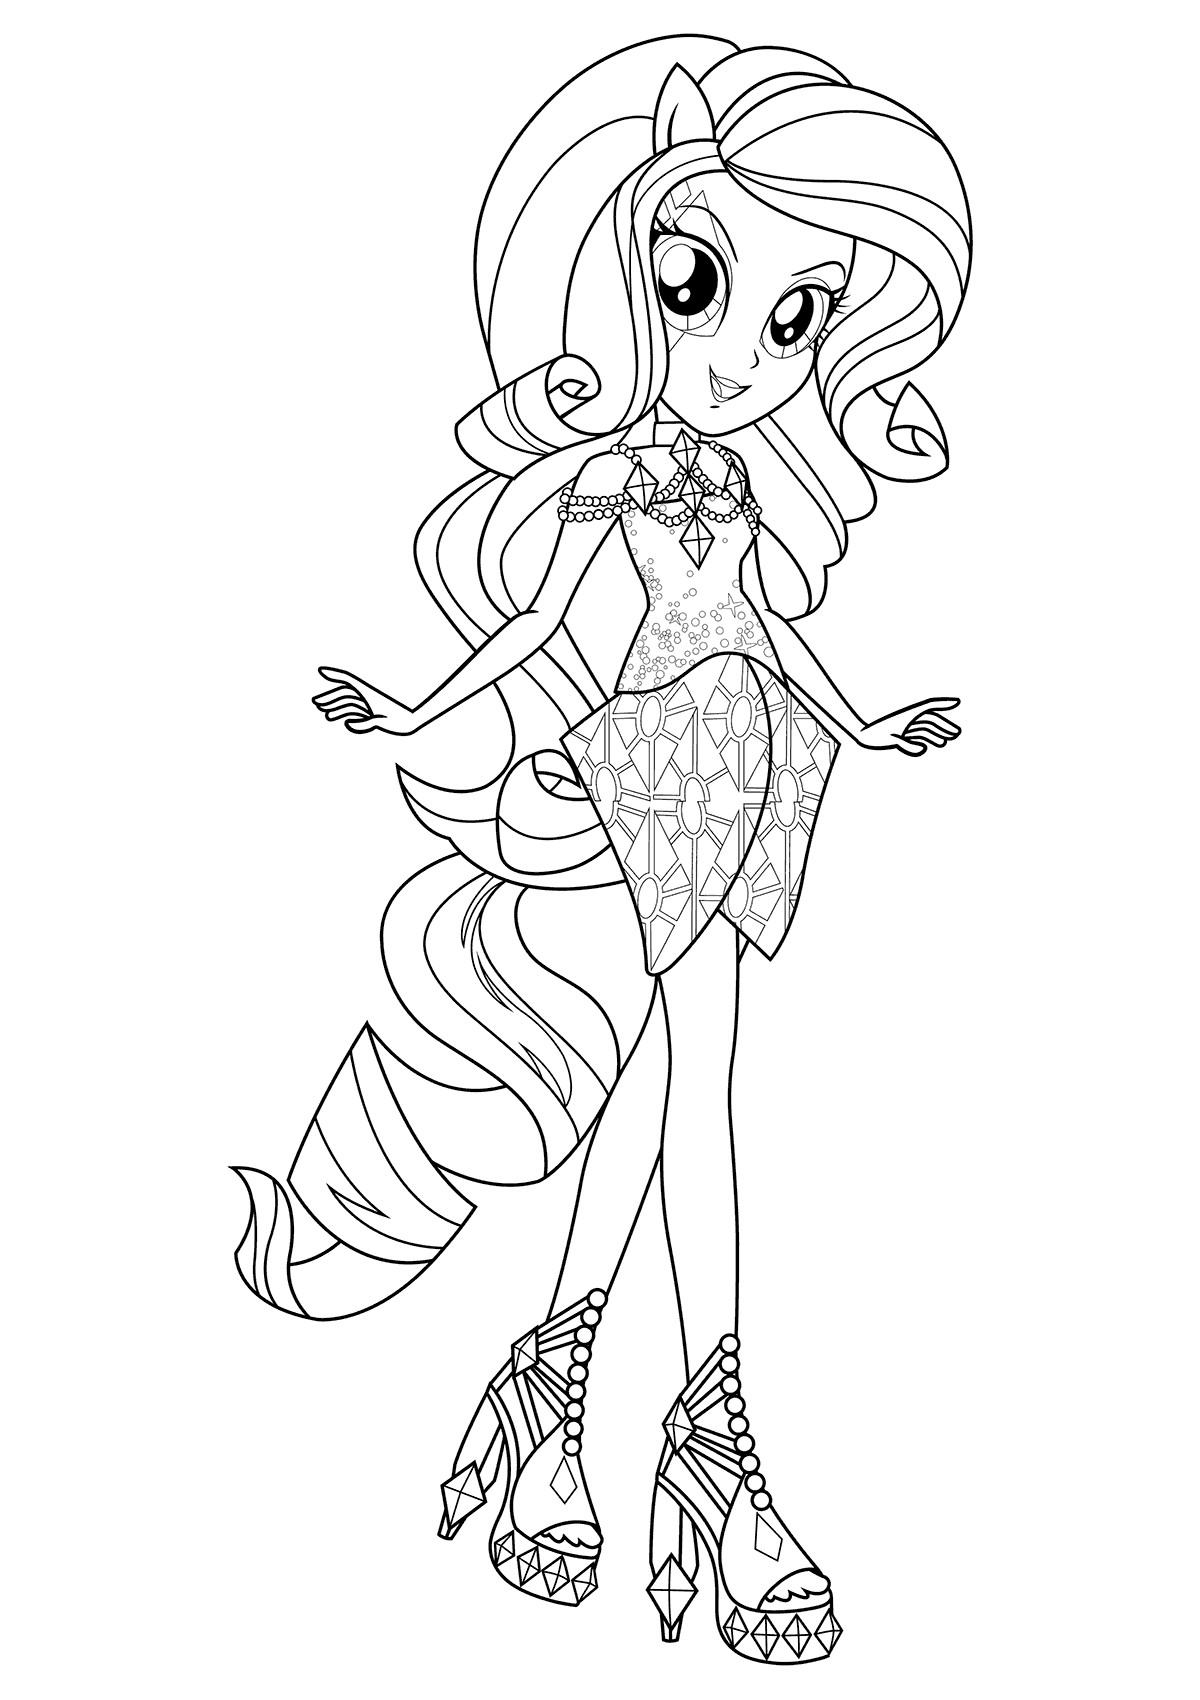 Coloring Pages Equestria Girls
 Equestria Girls Coloring Pages Best Coloring Pages For Kids